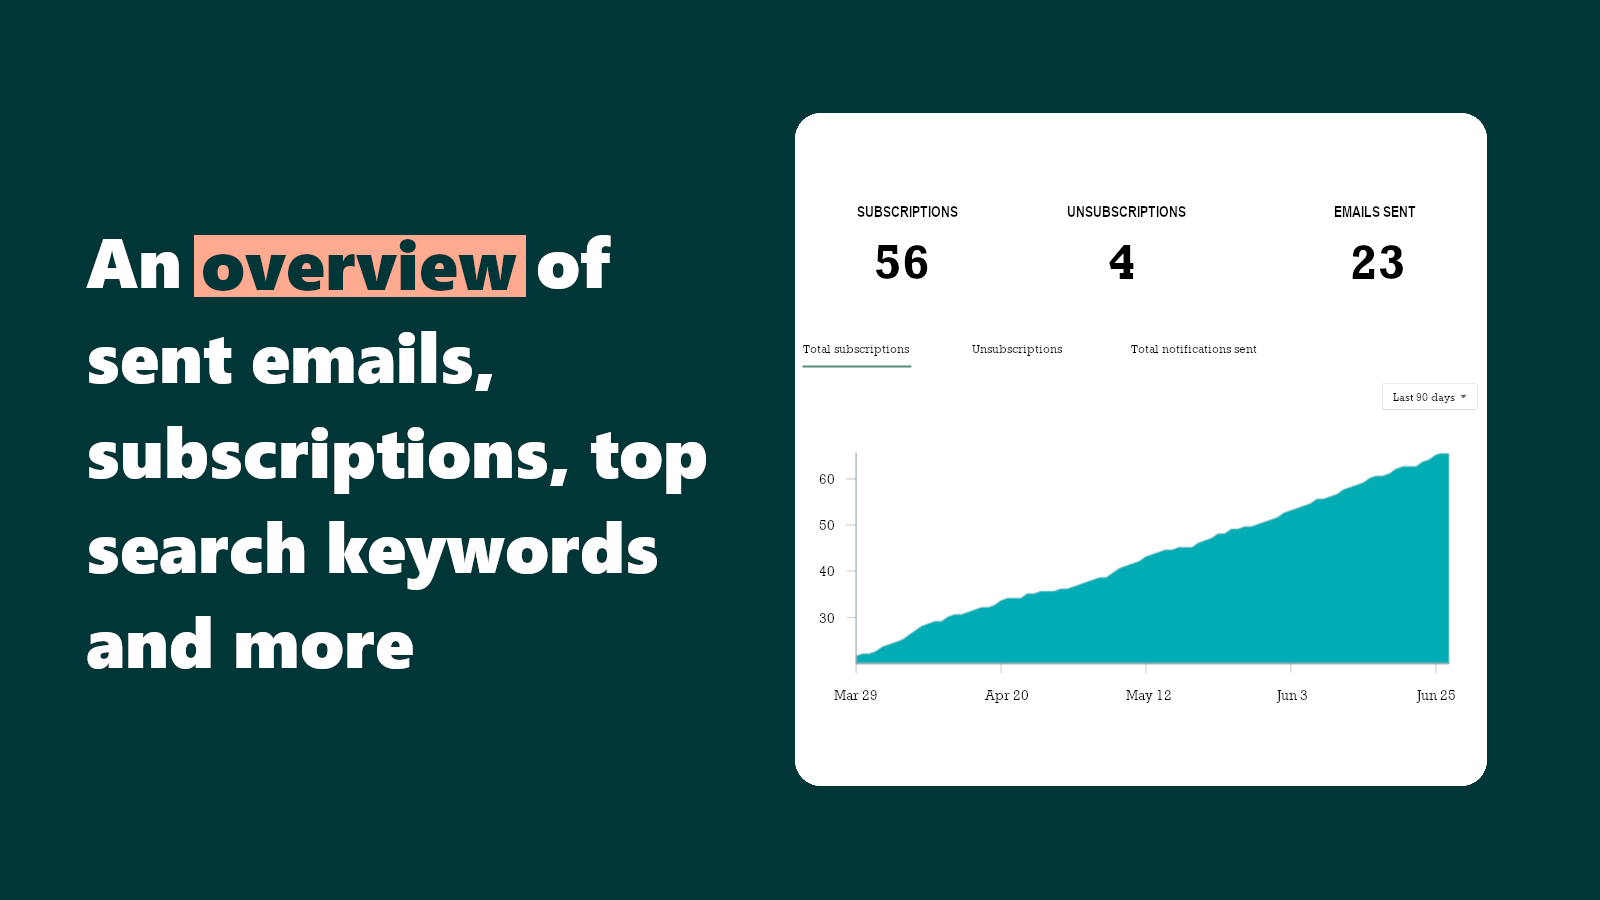 An overview of sent emails, subscriptions, top search keywords.